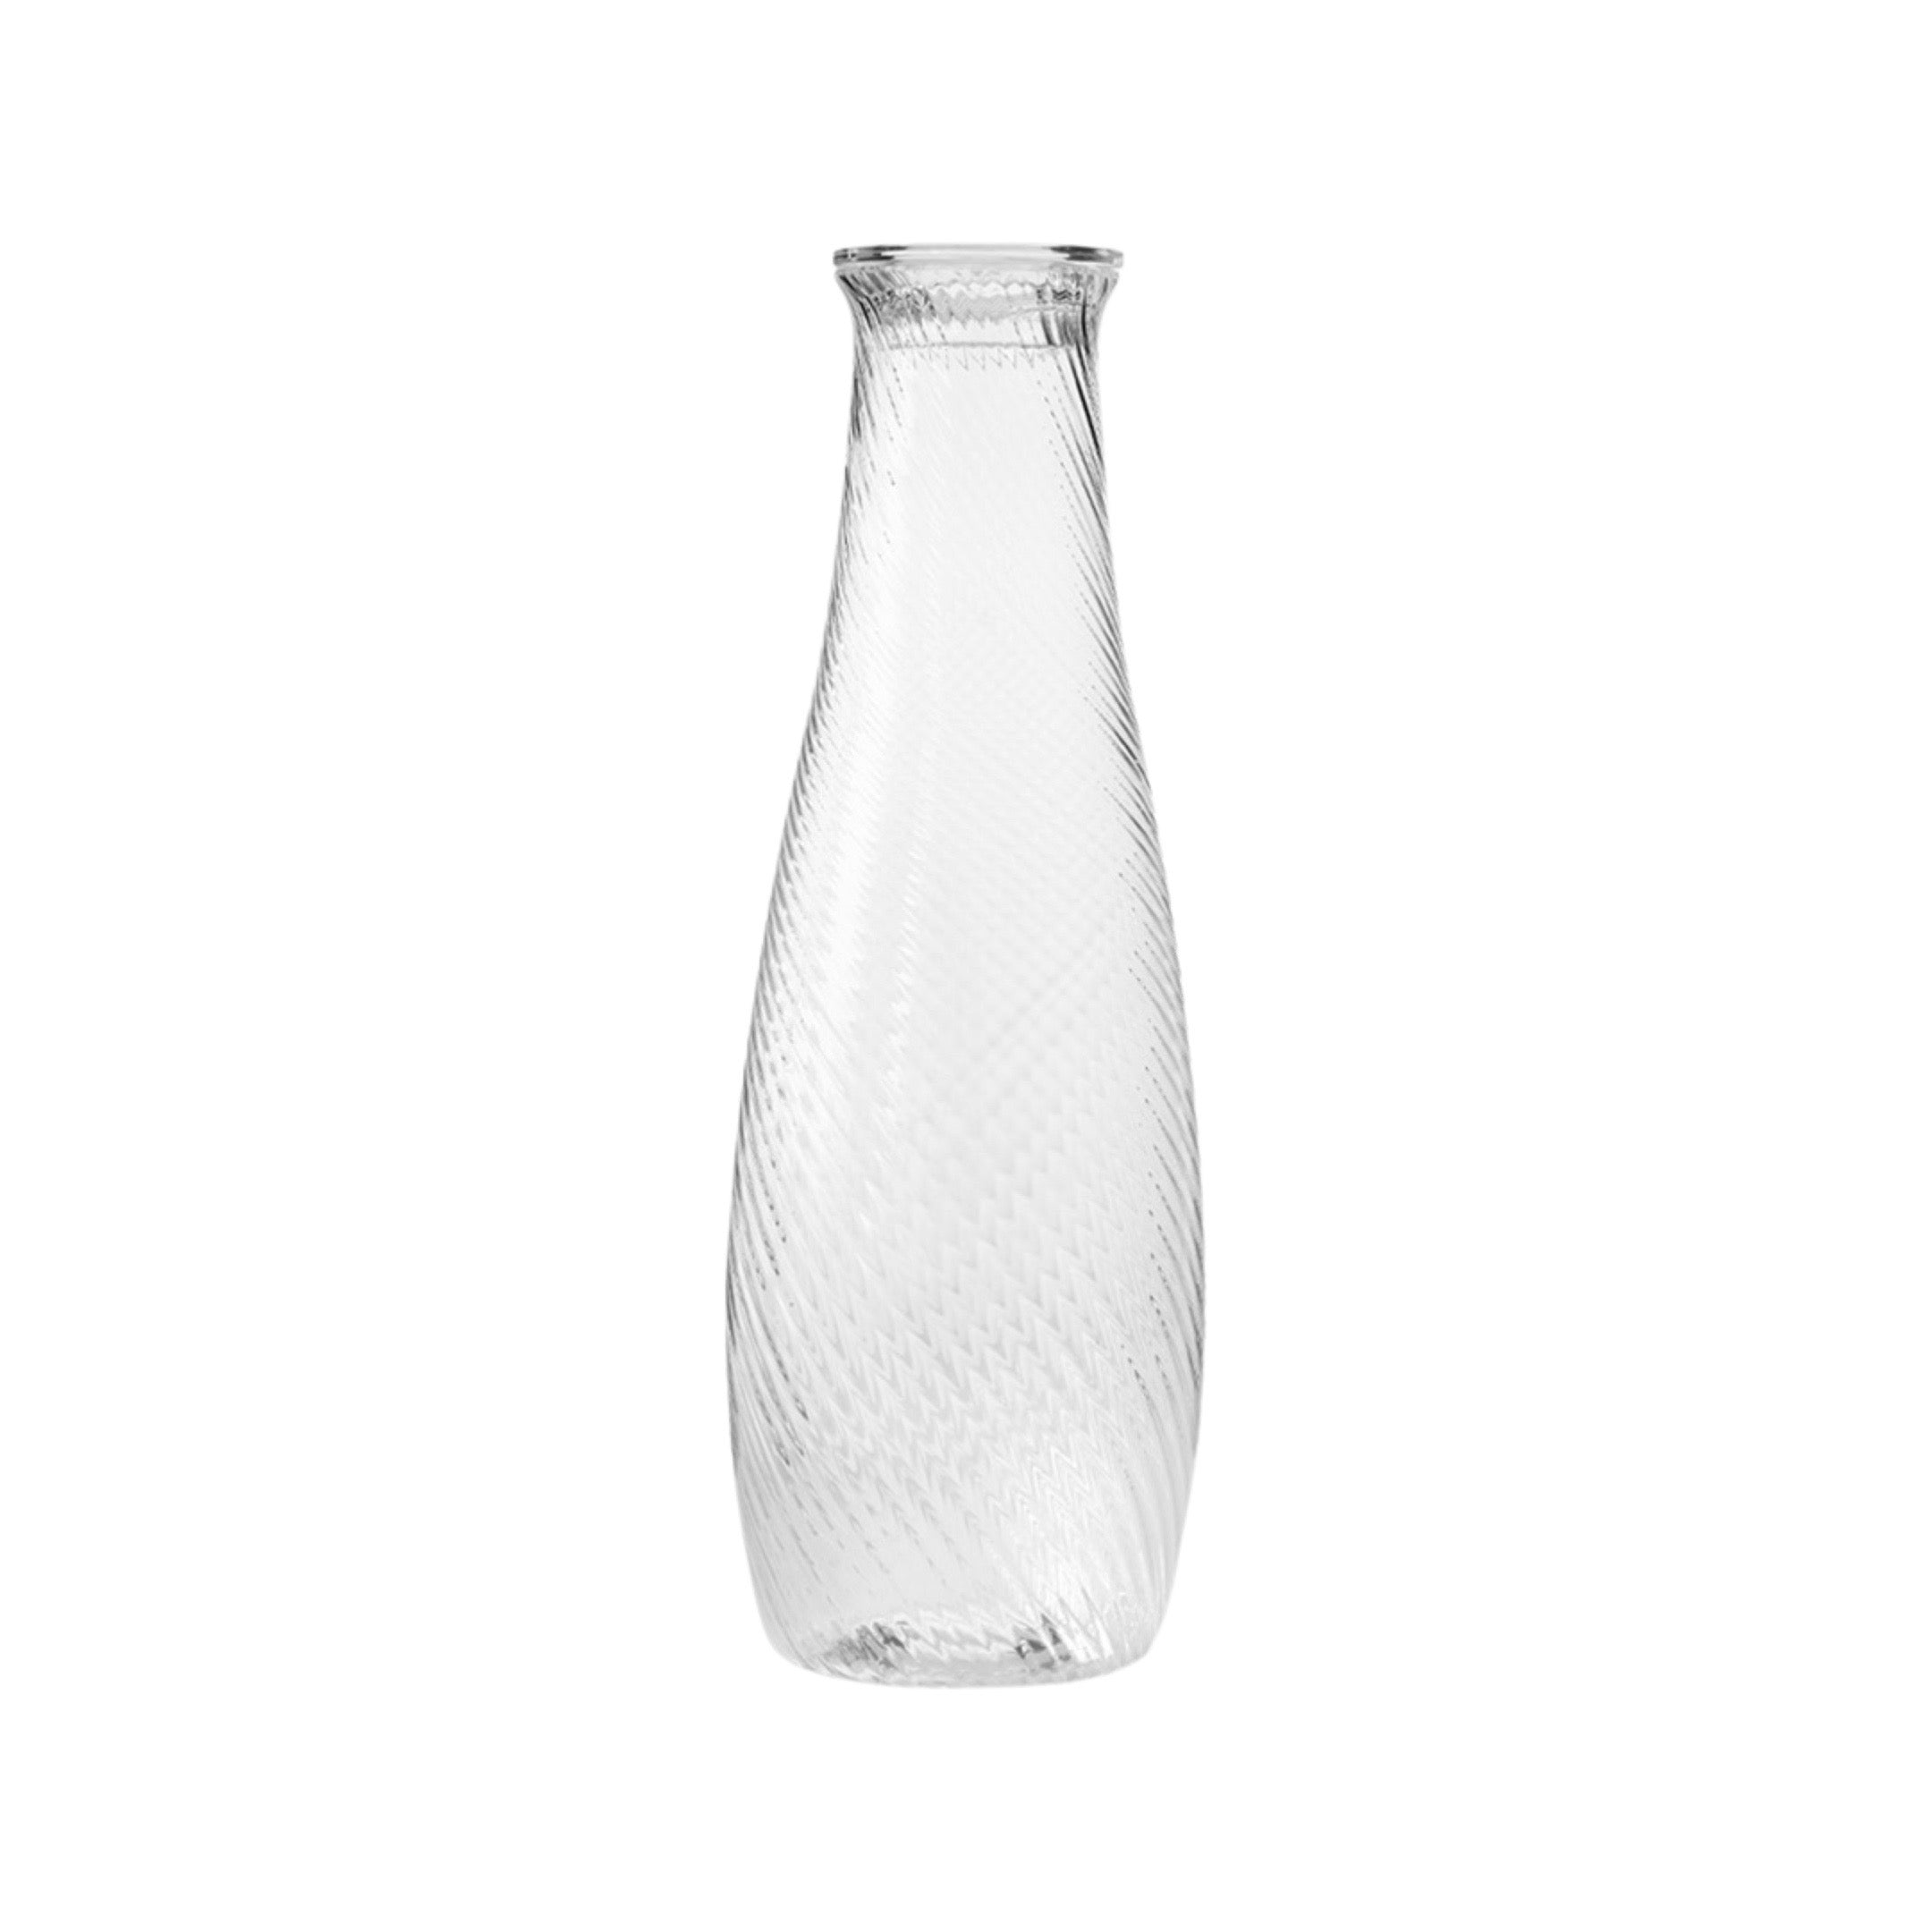 &Tradition Collect SC63 Carafe - 1.2L